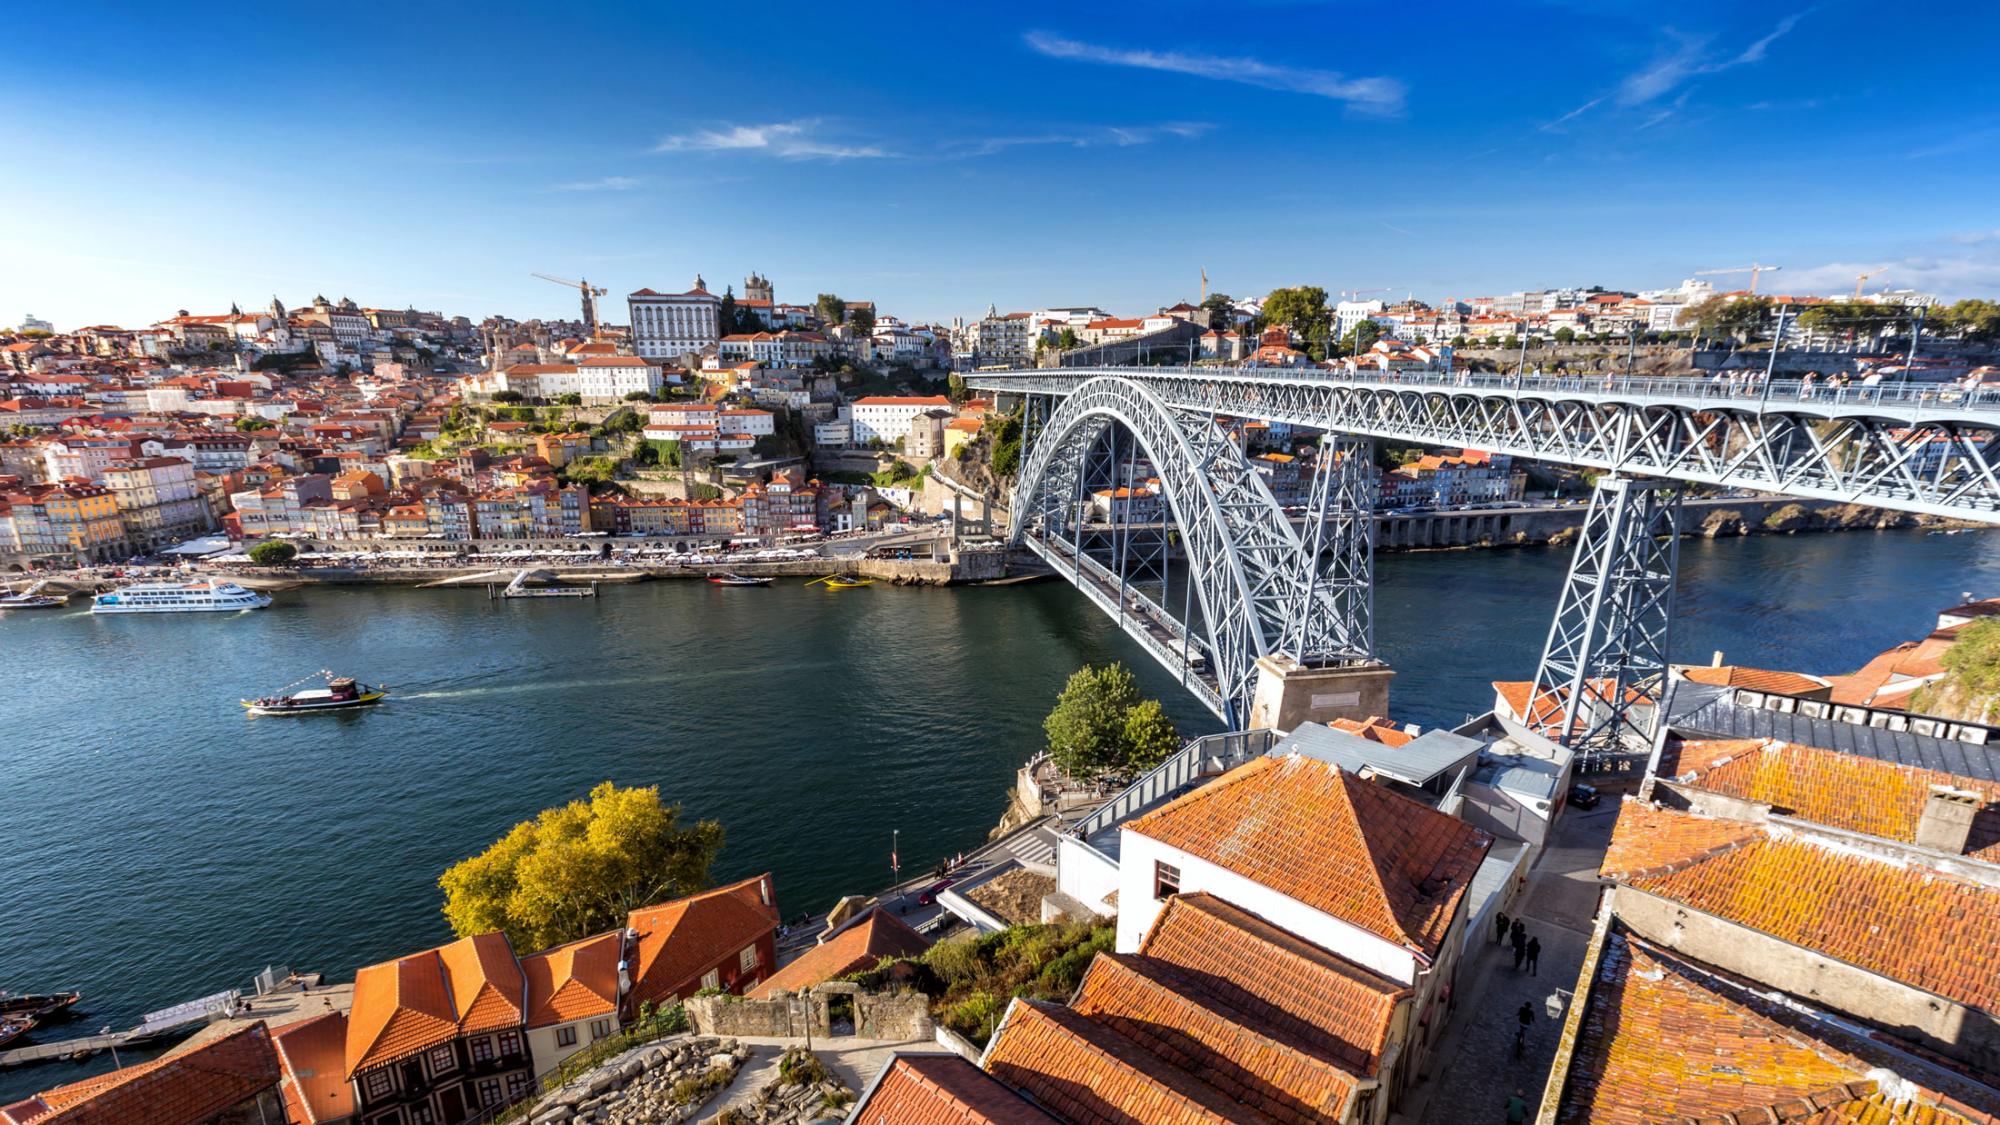 Waterfront in Portugal with a bridge